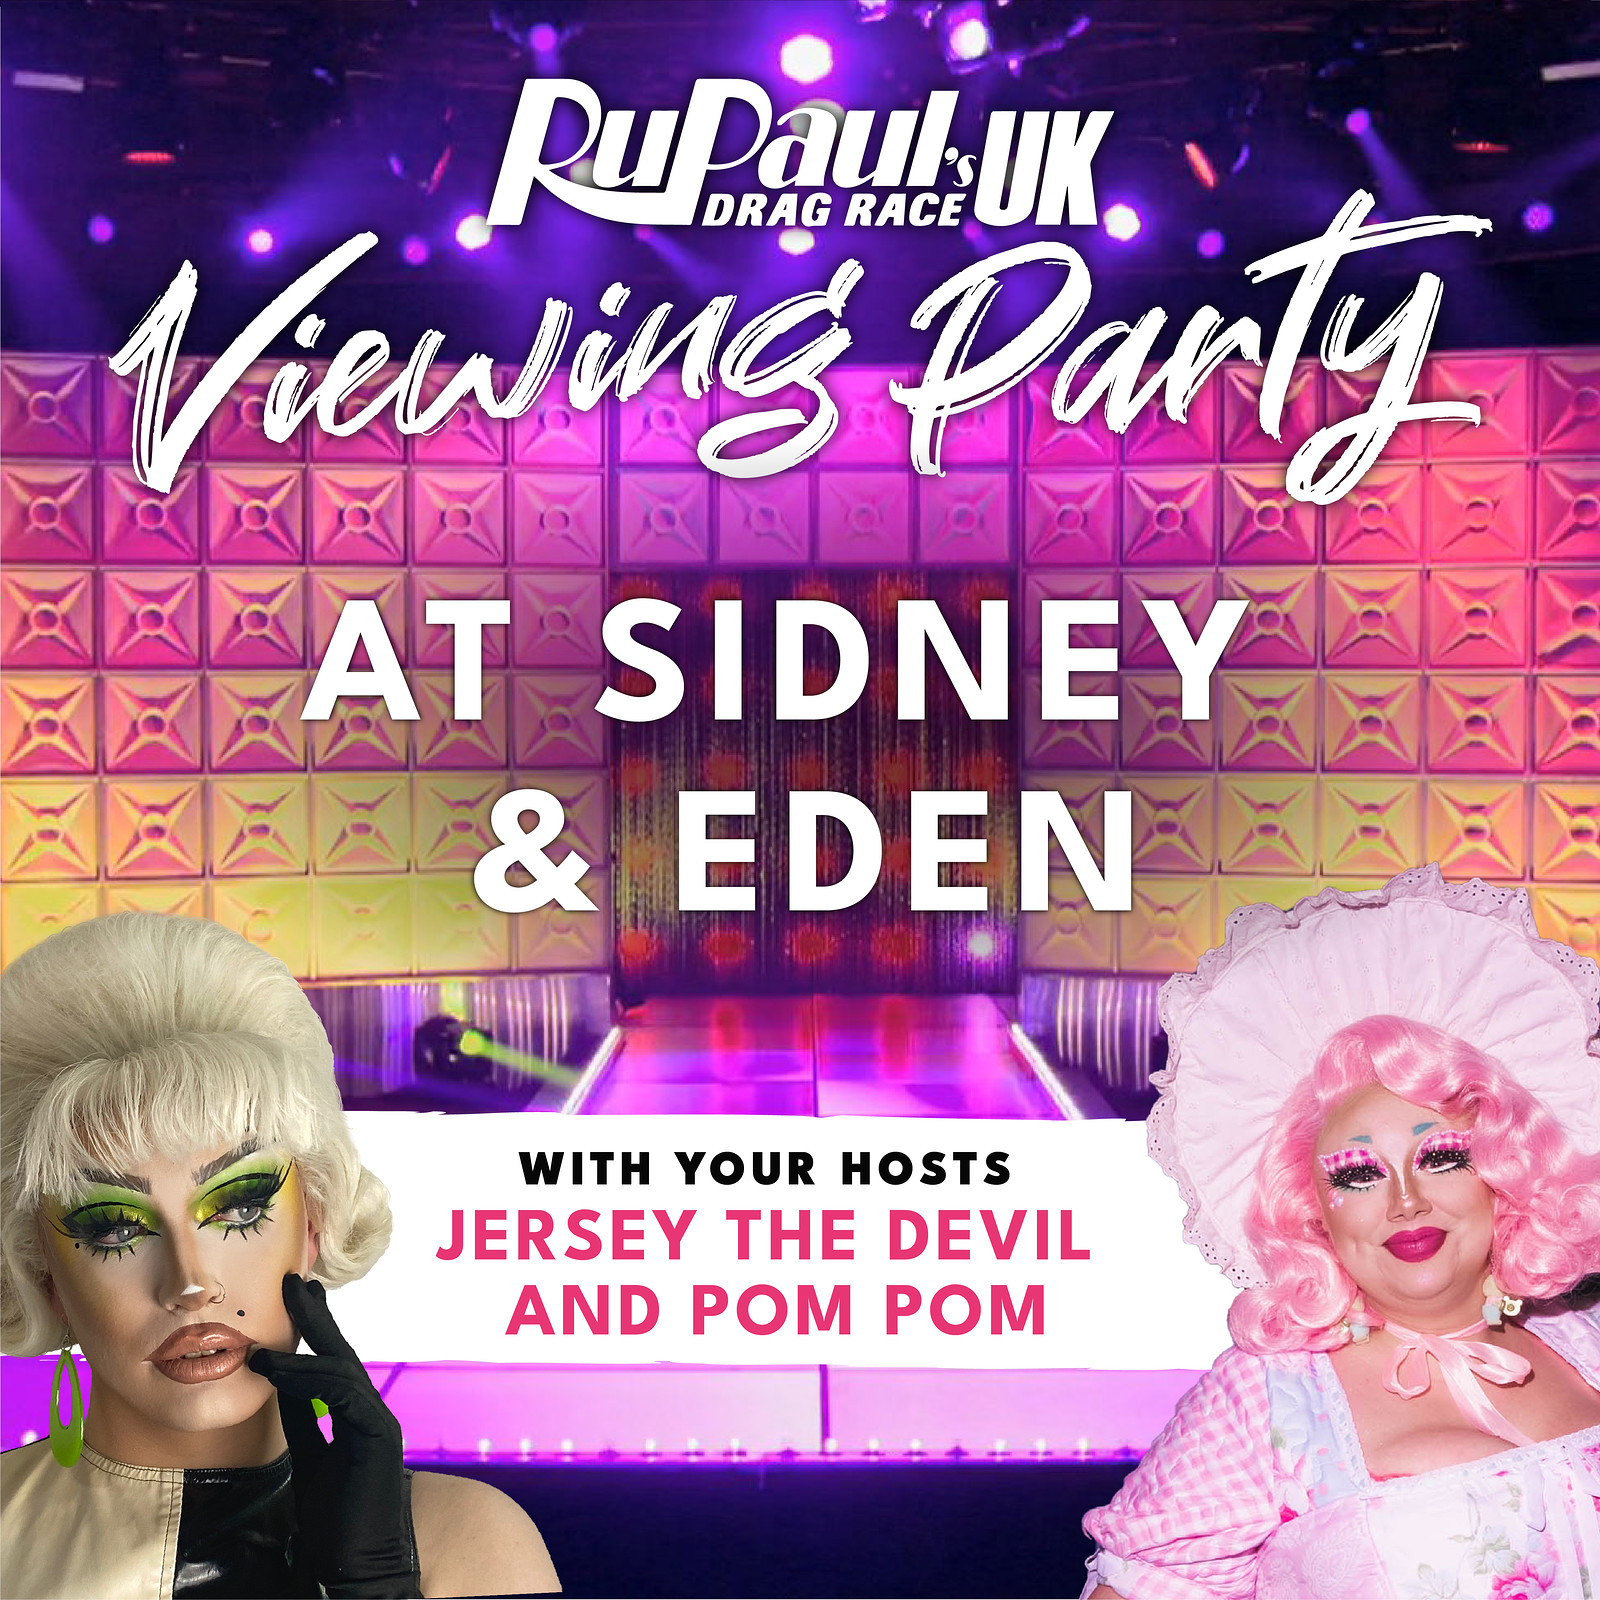 RuPaul's Drag Race UK Episode 1 Viewing Party at Sidney & Eden